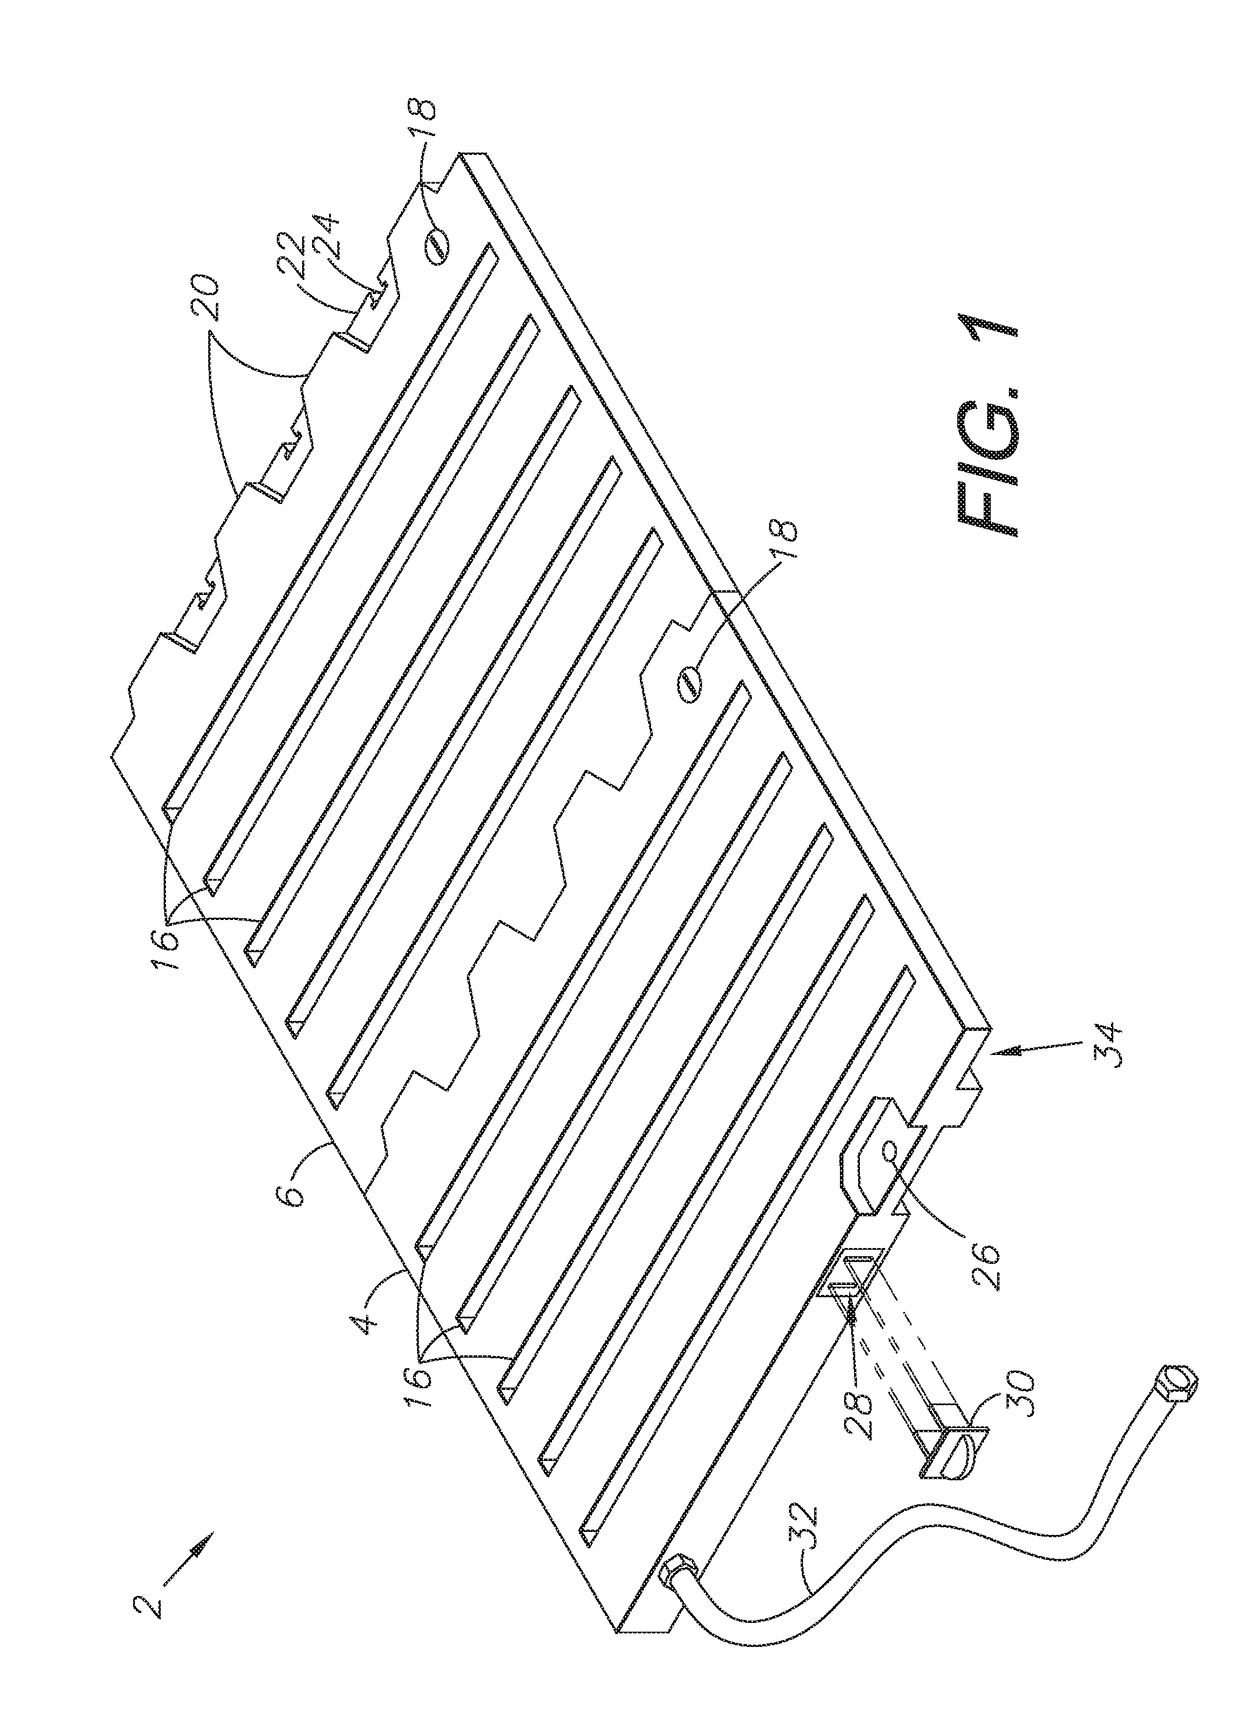 Modular heated surface system and method of installation